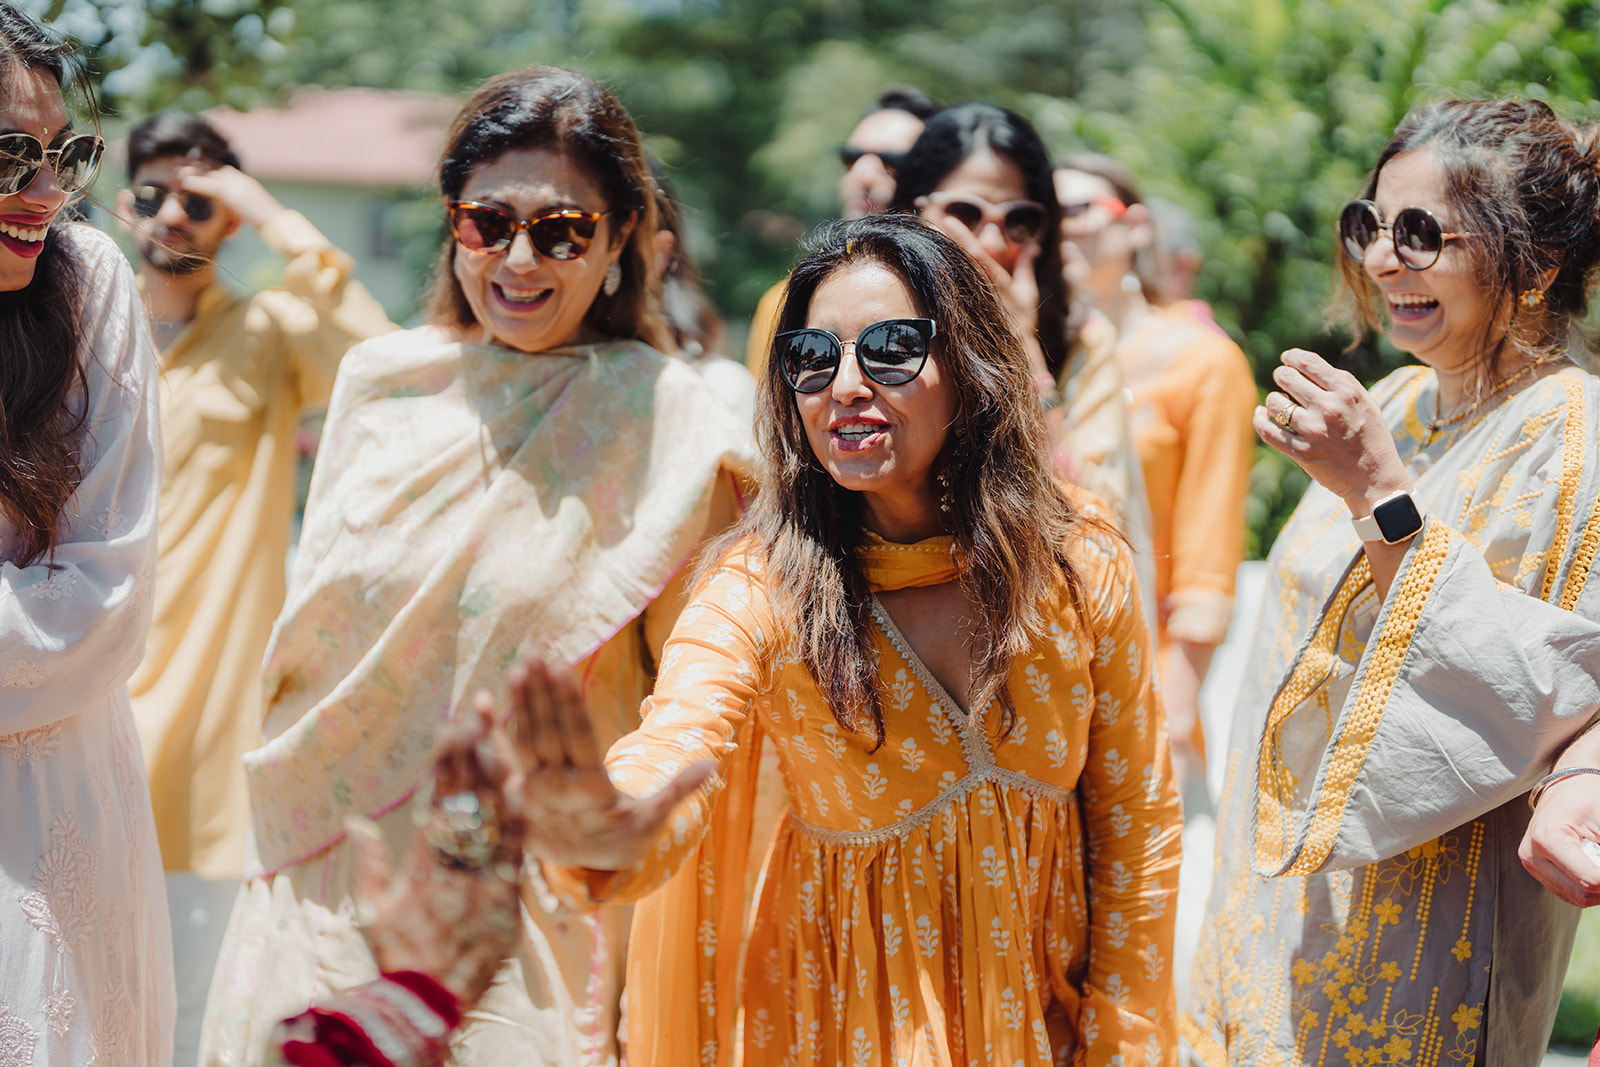 Celebrating in style: Participant relishing the vibrant and spirited haldi ritual.